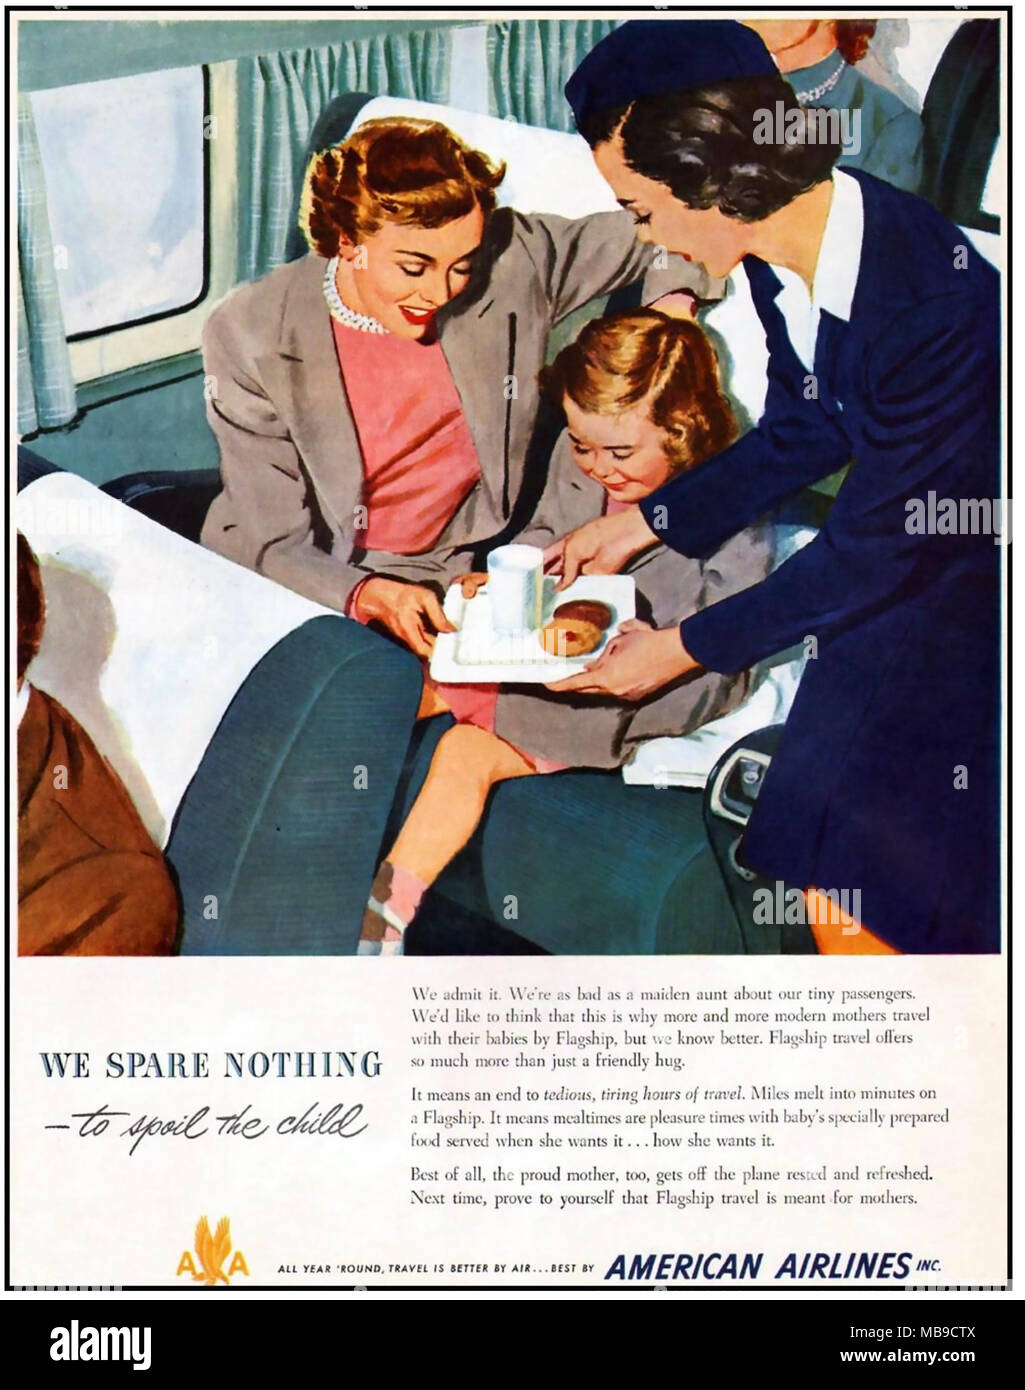 AMERICAN AIRLINES advert 1949 Stock Photo